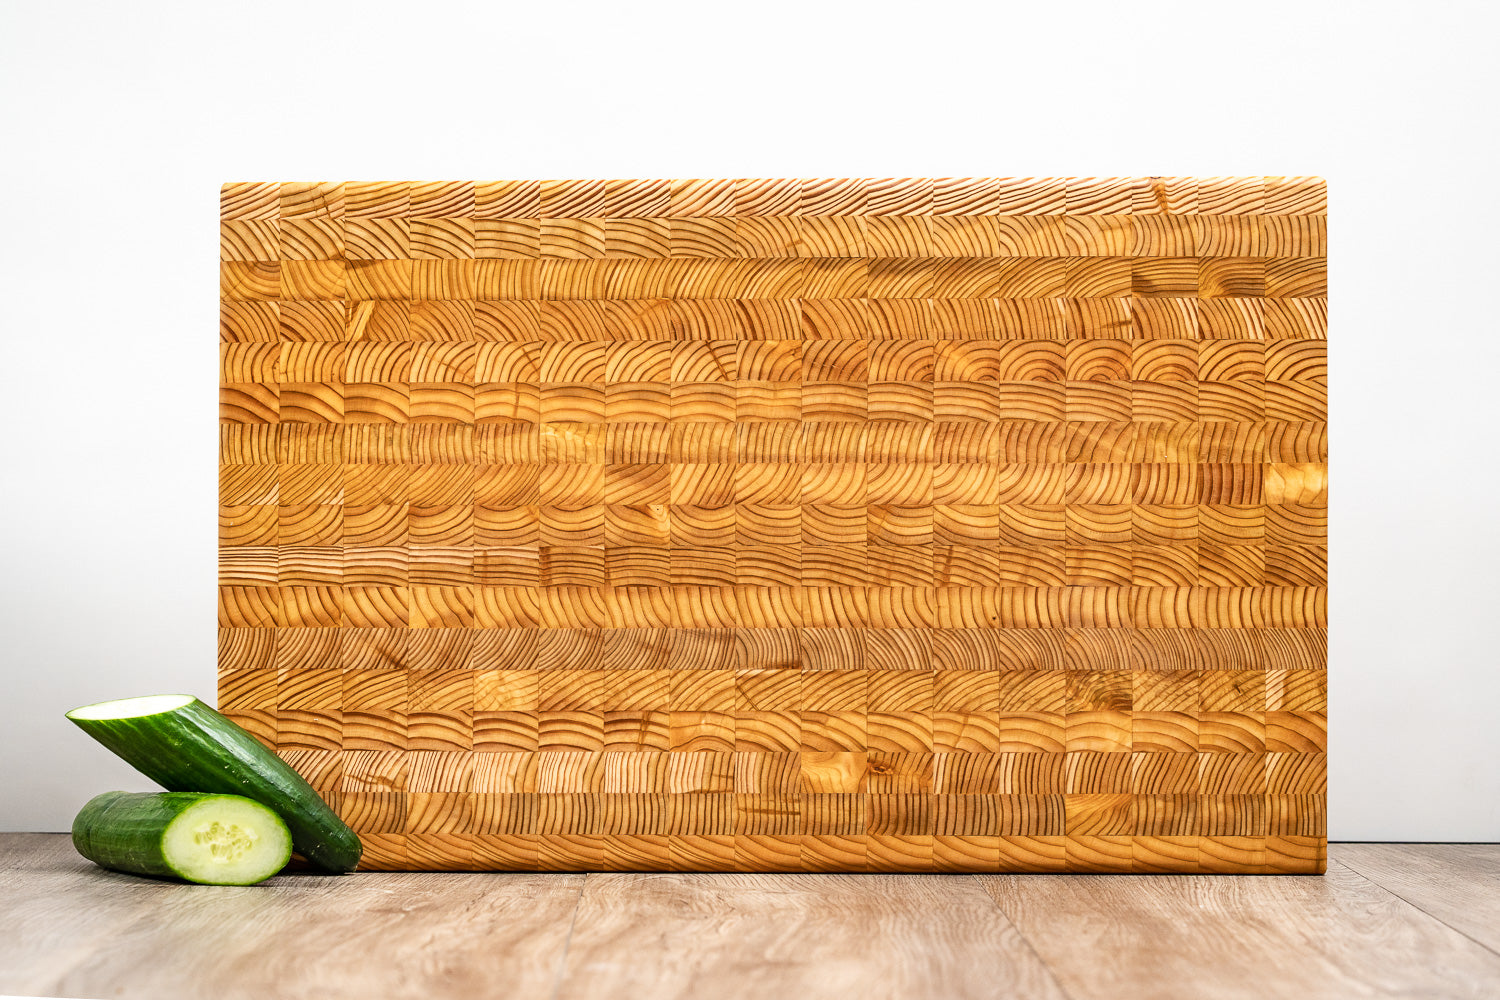 Larch Wood Canada – Handmade End-Grain Cutting Boards and More